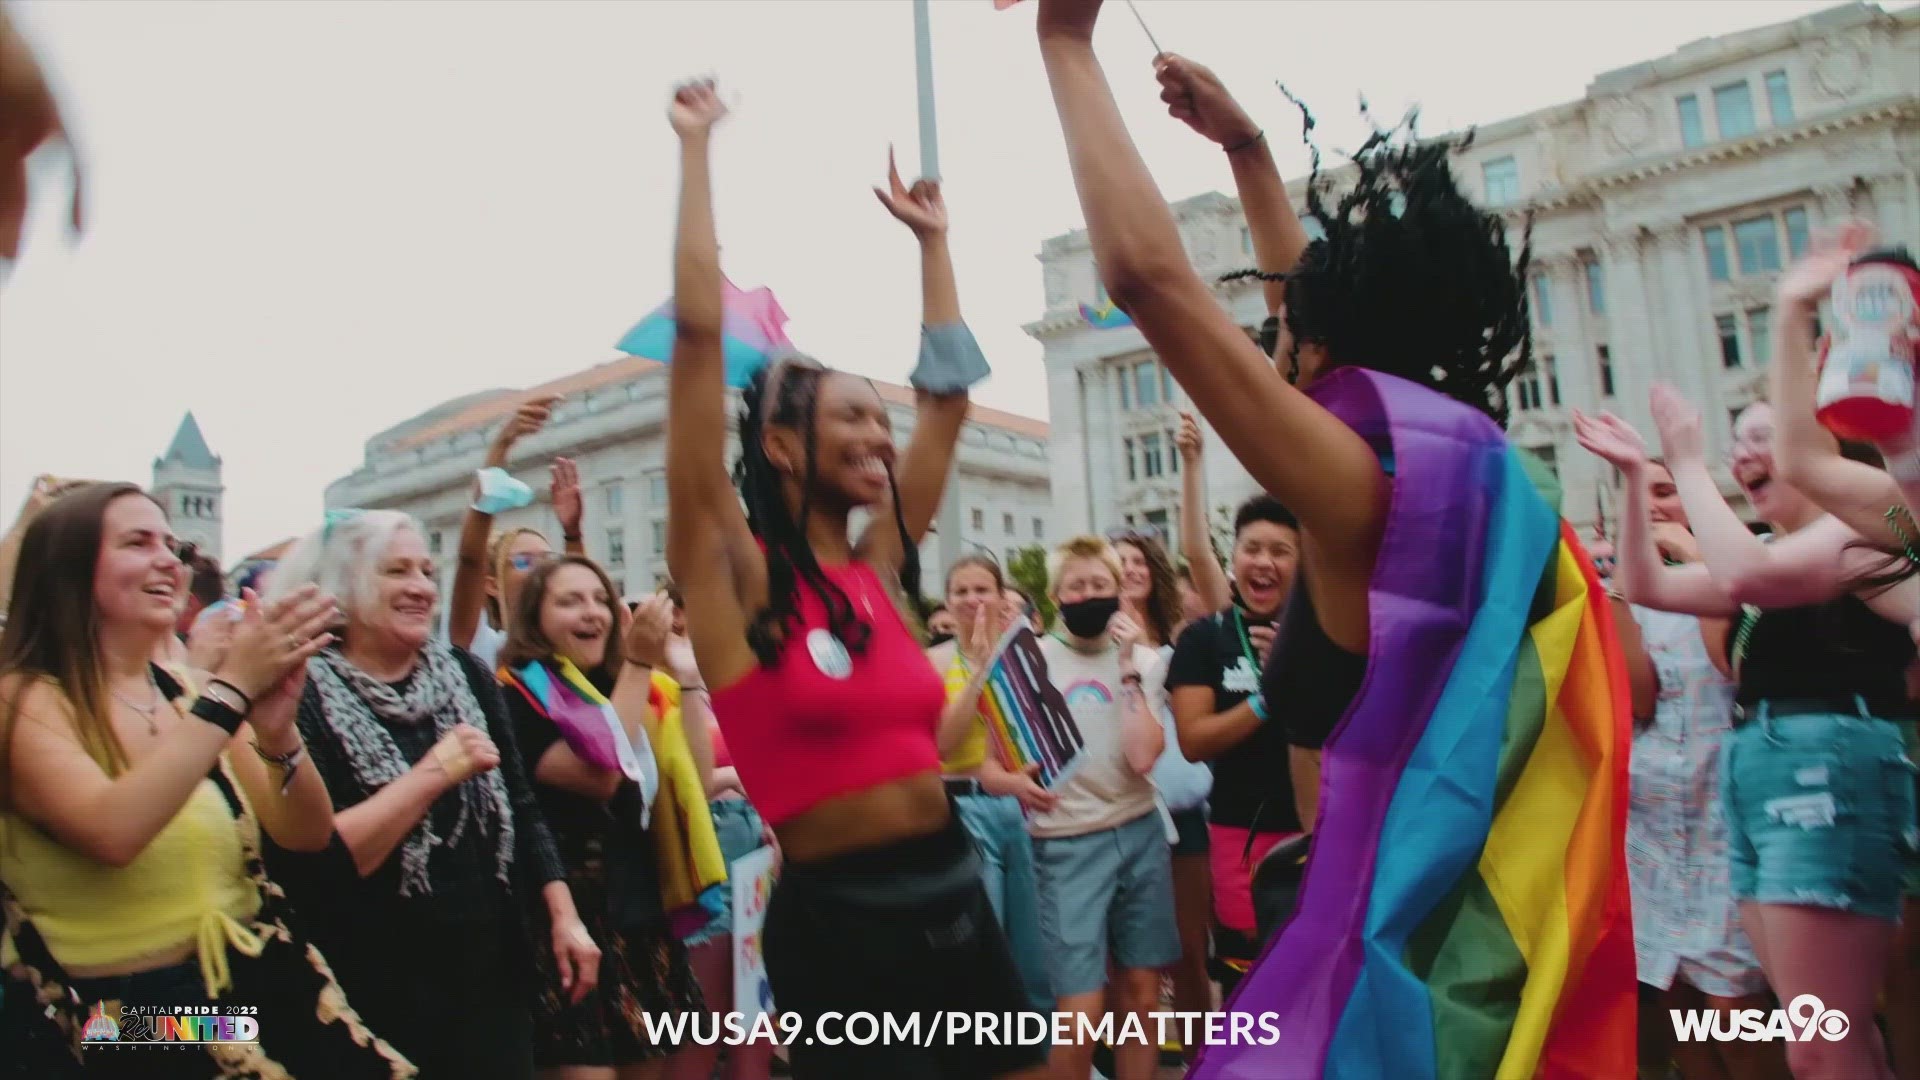 DC Capital Pride is June 10 and 11, join WUSA9 because #PrideMatters